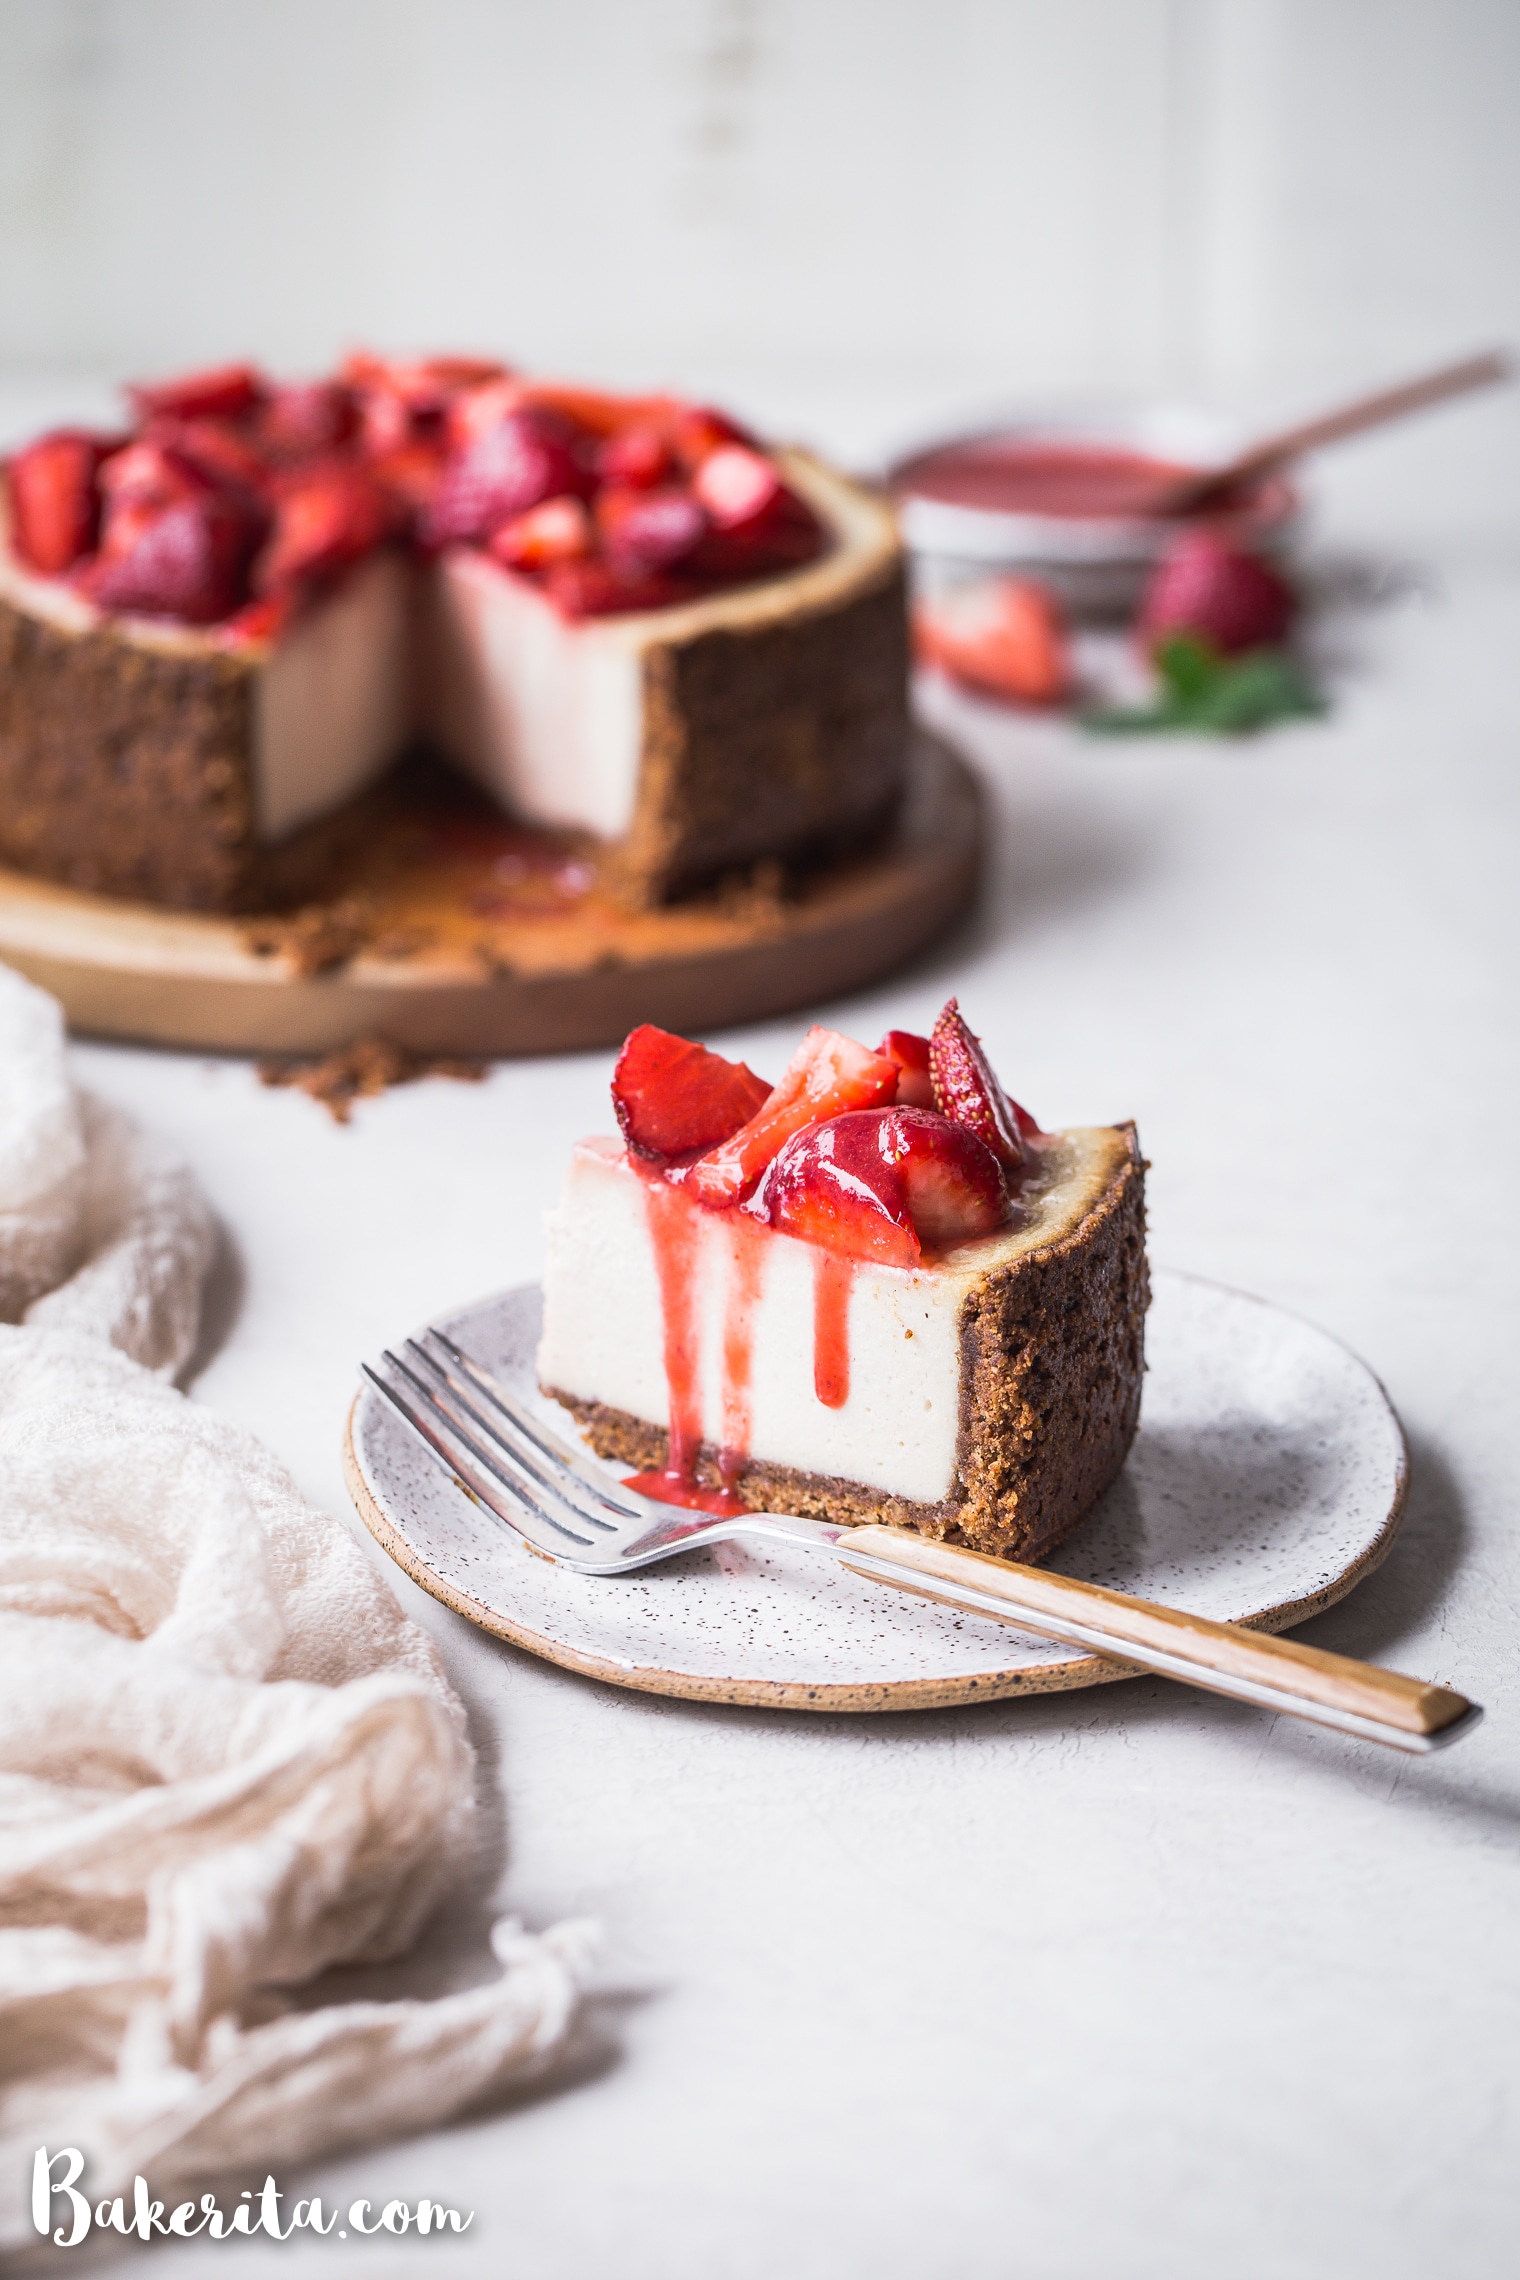 In this Baked Vegan Cheesecake, a gluten-free and paleo graham cracker-style crust encases a sweet and creamy vanilla cheesecake filling. Coconut yogurt and cashews create the perfect texture to mimic a classic cheesecake.